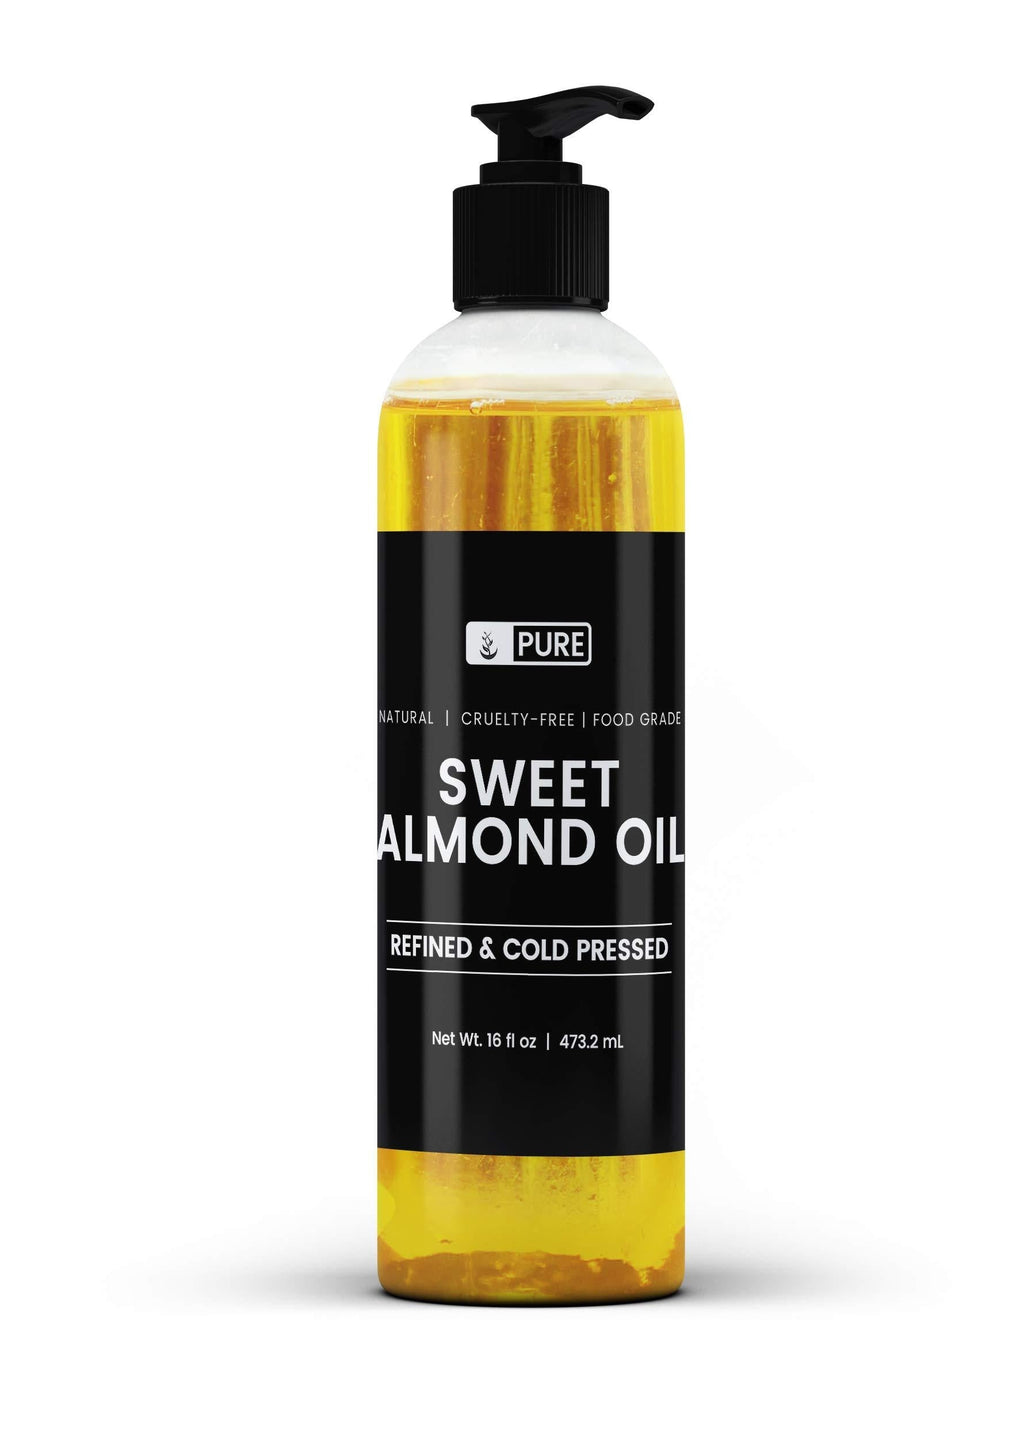 [Australia] - Natural Sweet Almond Oil, 16 fl oz, Cold-Pressed, Fragrance-Free, Lab-Tested, No Additives, No Preservatives & Cruelty-Free, US Made, BPA-Free & Recyclable Bottle 16 Ounce 